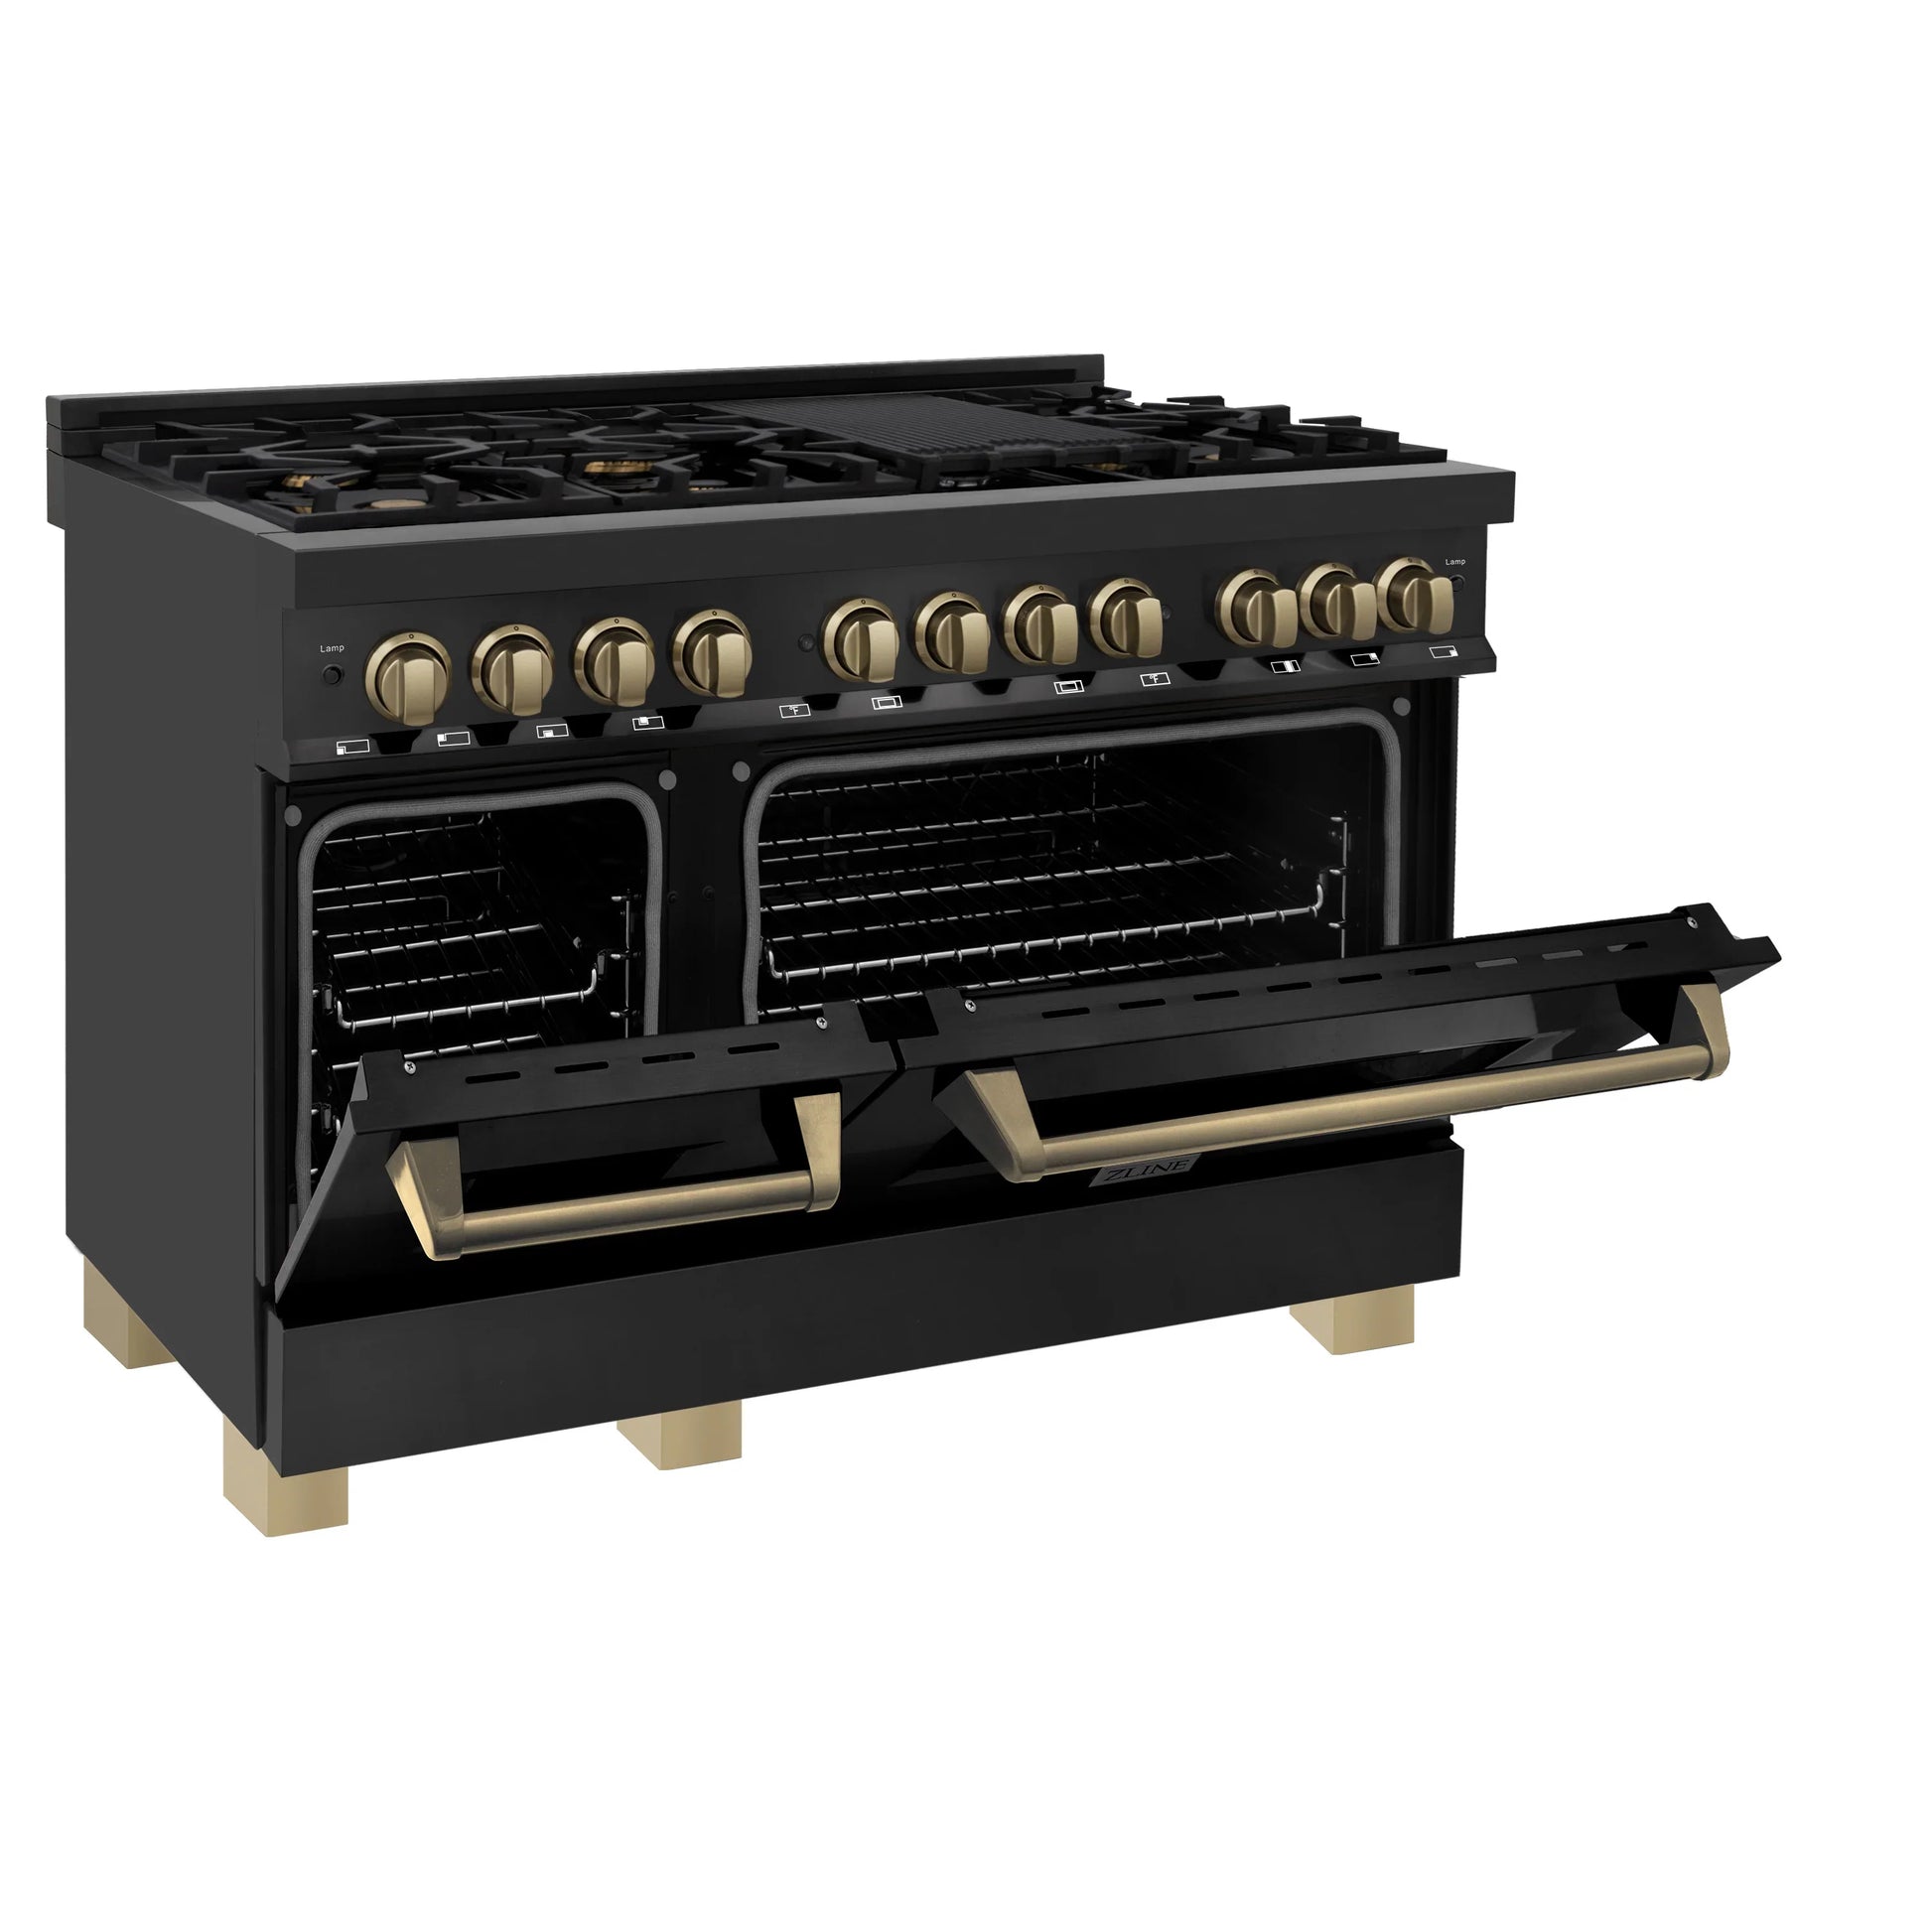 ZLINE Autograph Edition 48" Dual Fuel Range with Gas Stove and Electric Oven - Black Stainless Steel, Champagne Bronze Accents